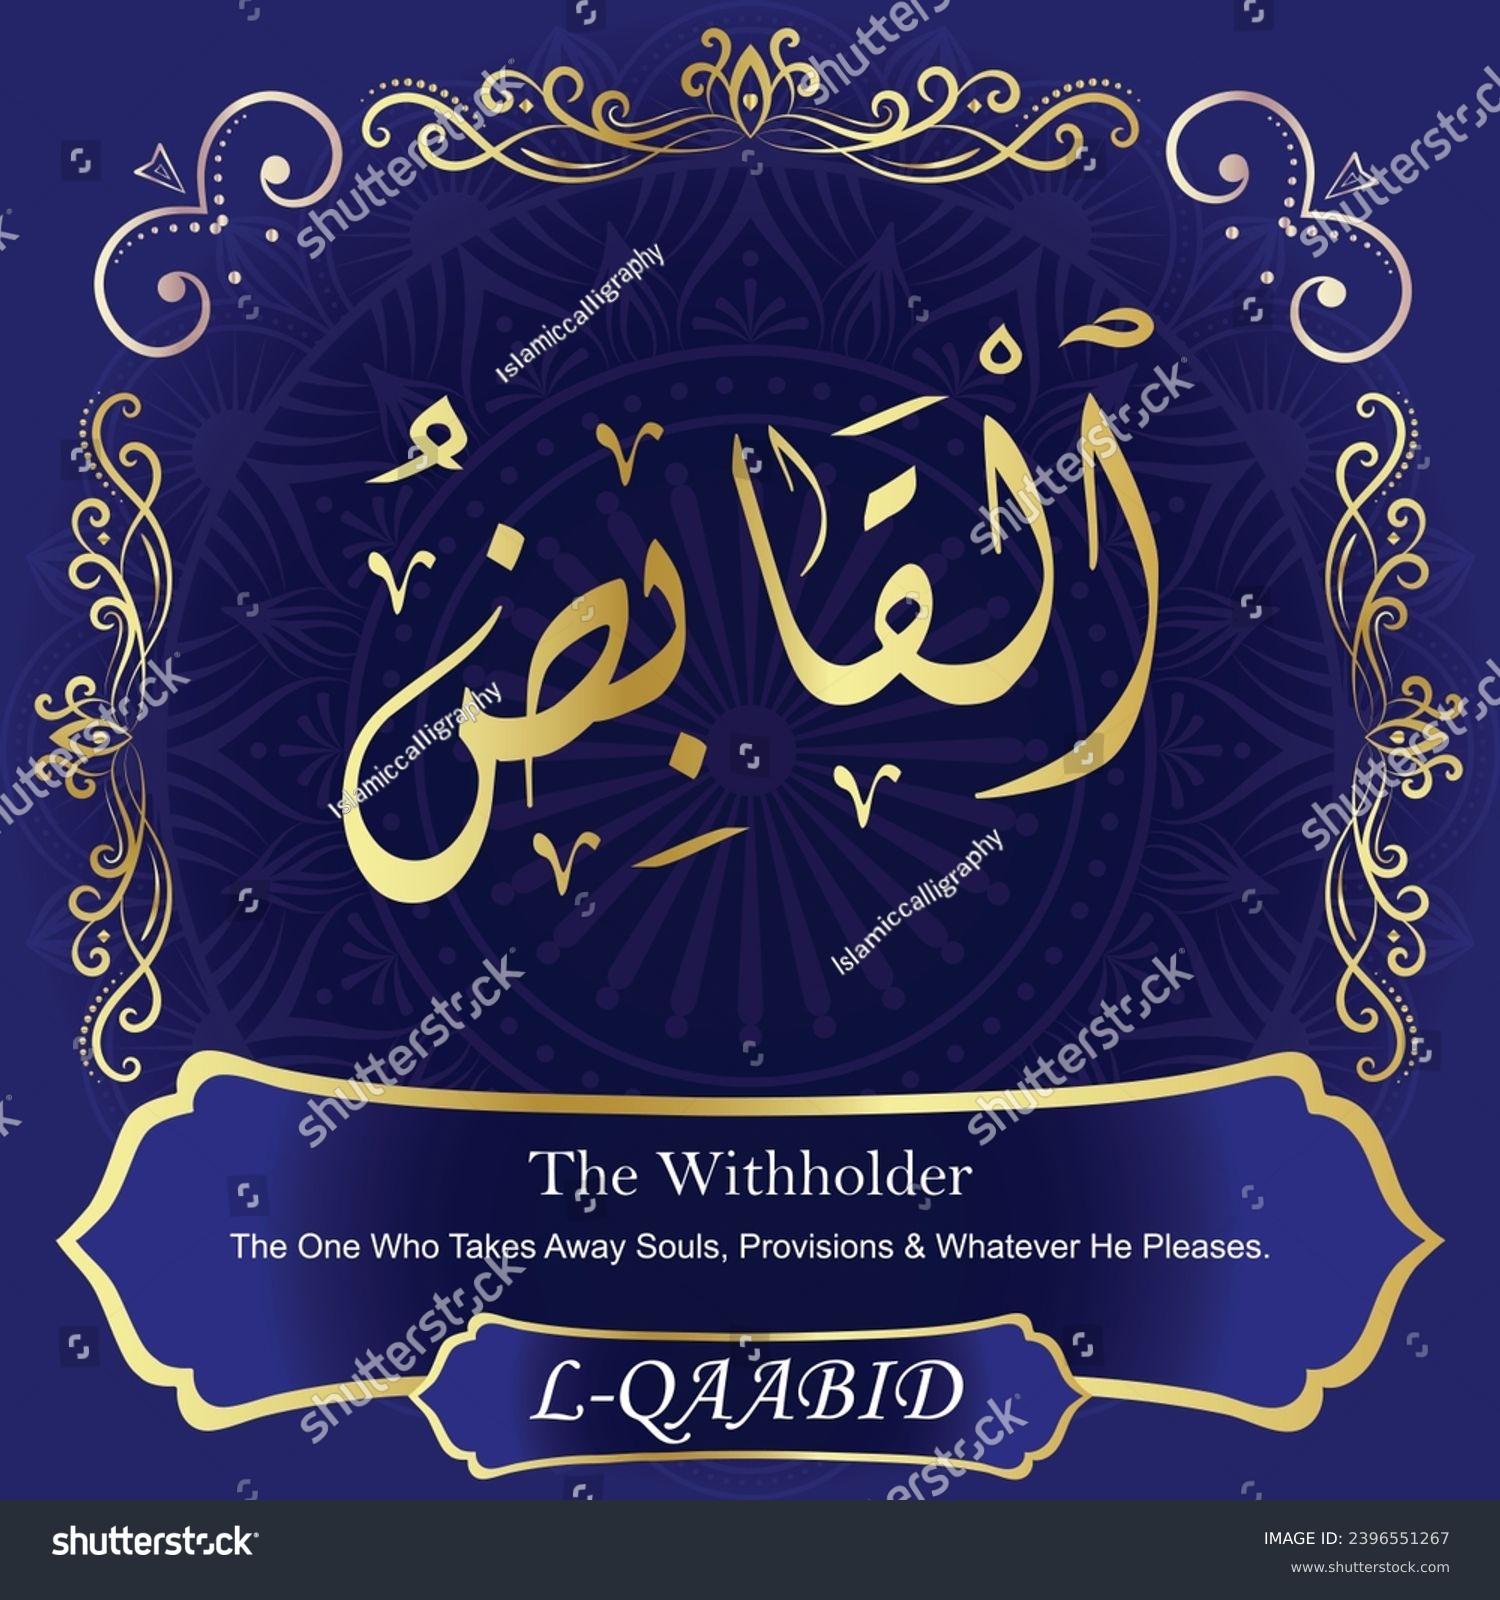 SVG of The Withholder. The One Who Takes Away Souls, Provisions and Whatever He
Pleases. svg